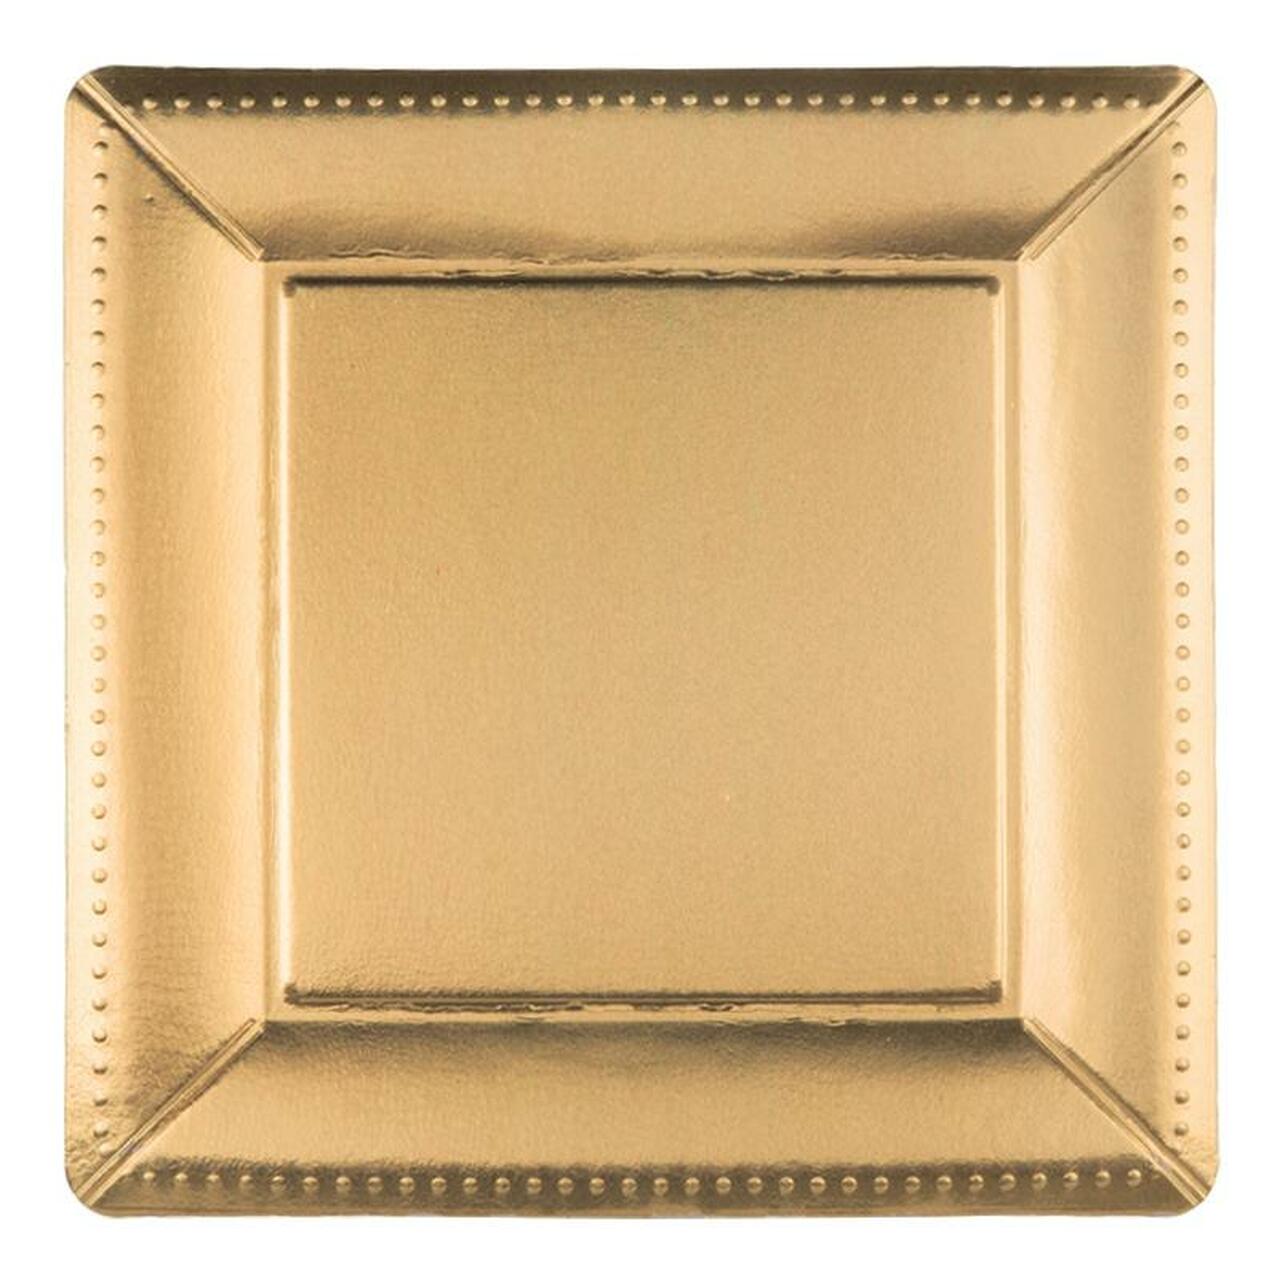 13" Gold Square Edge Beaded Disposable Paper Charger Plates (10 Count) - Set With Style